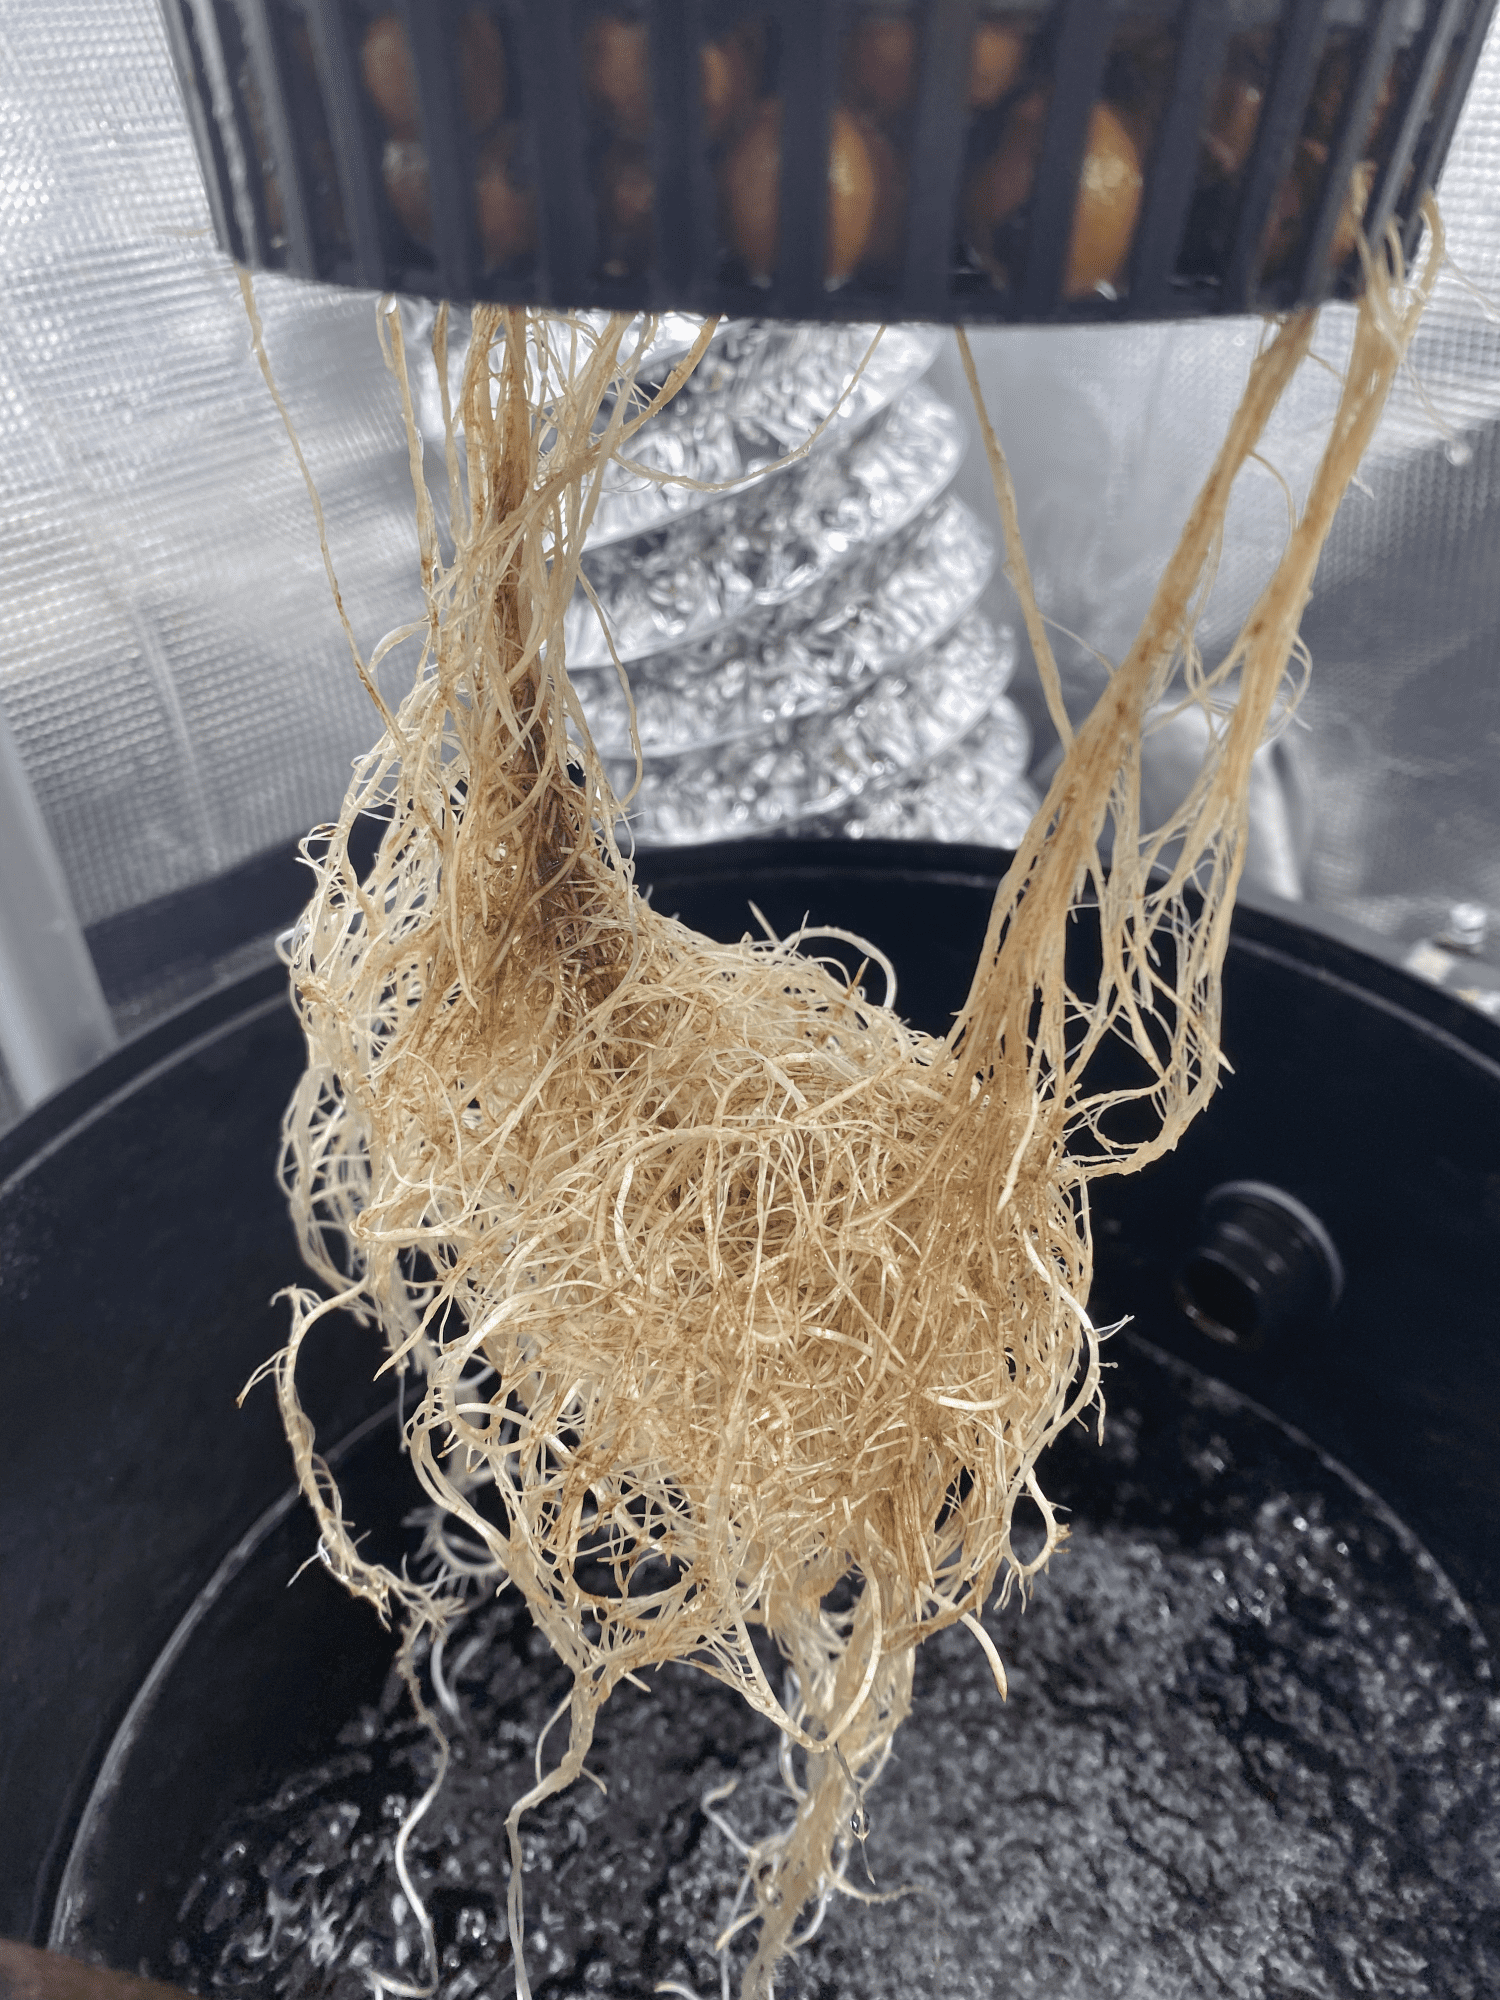 Is this root rot or stained from nutes hydrogrow